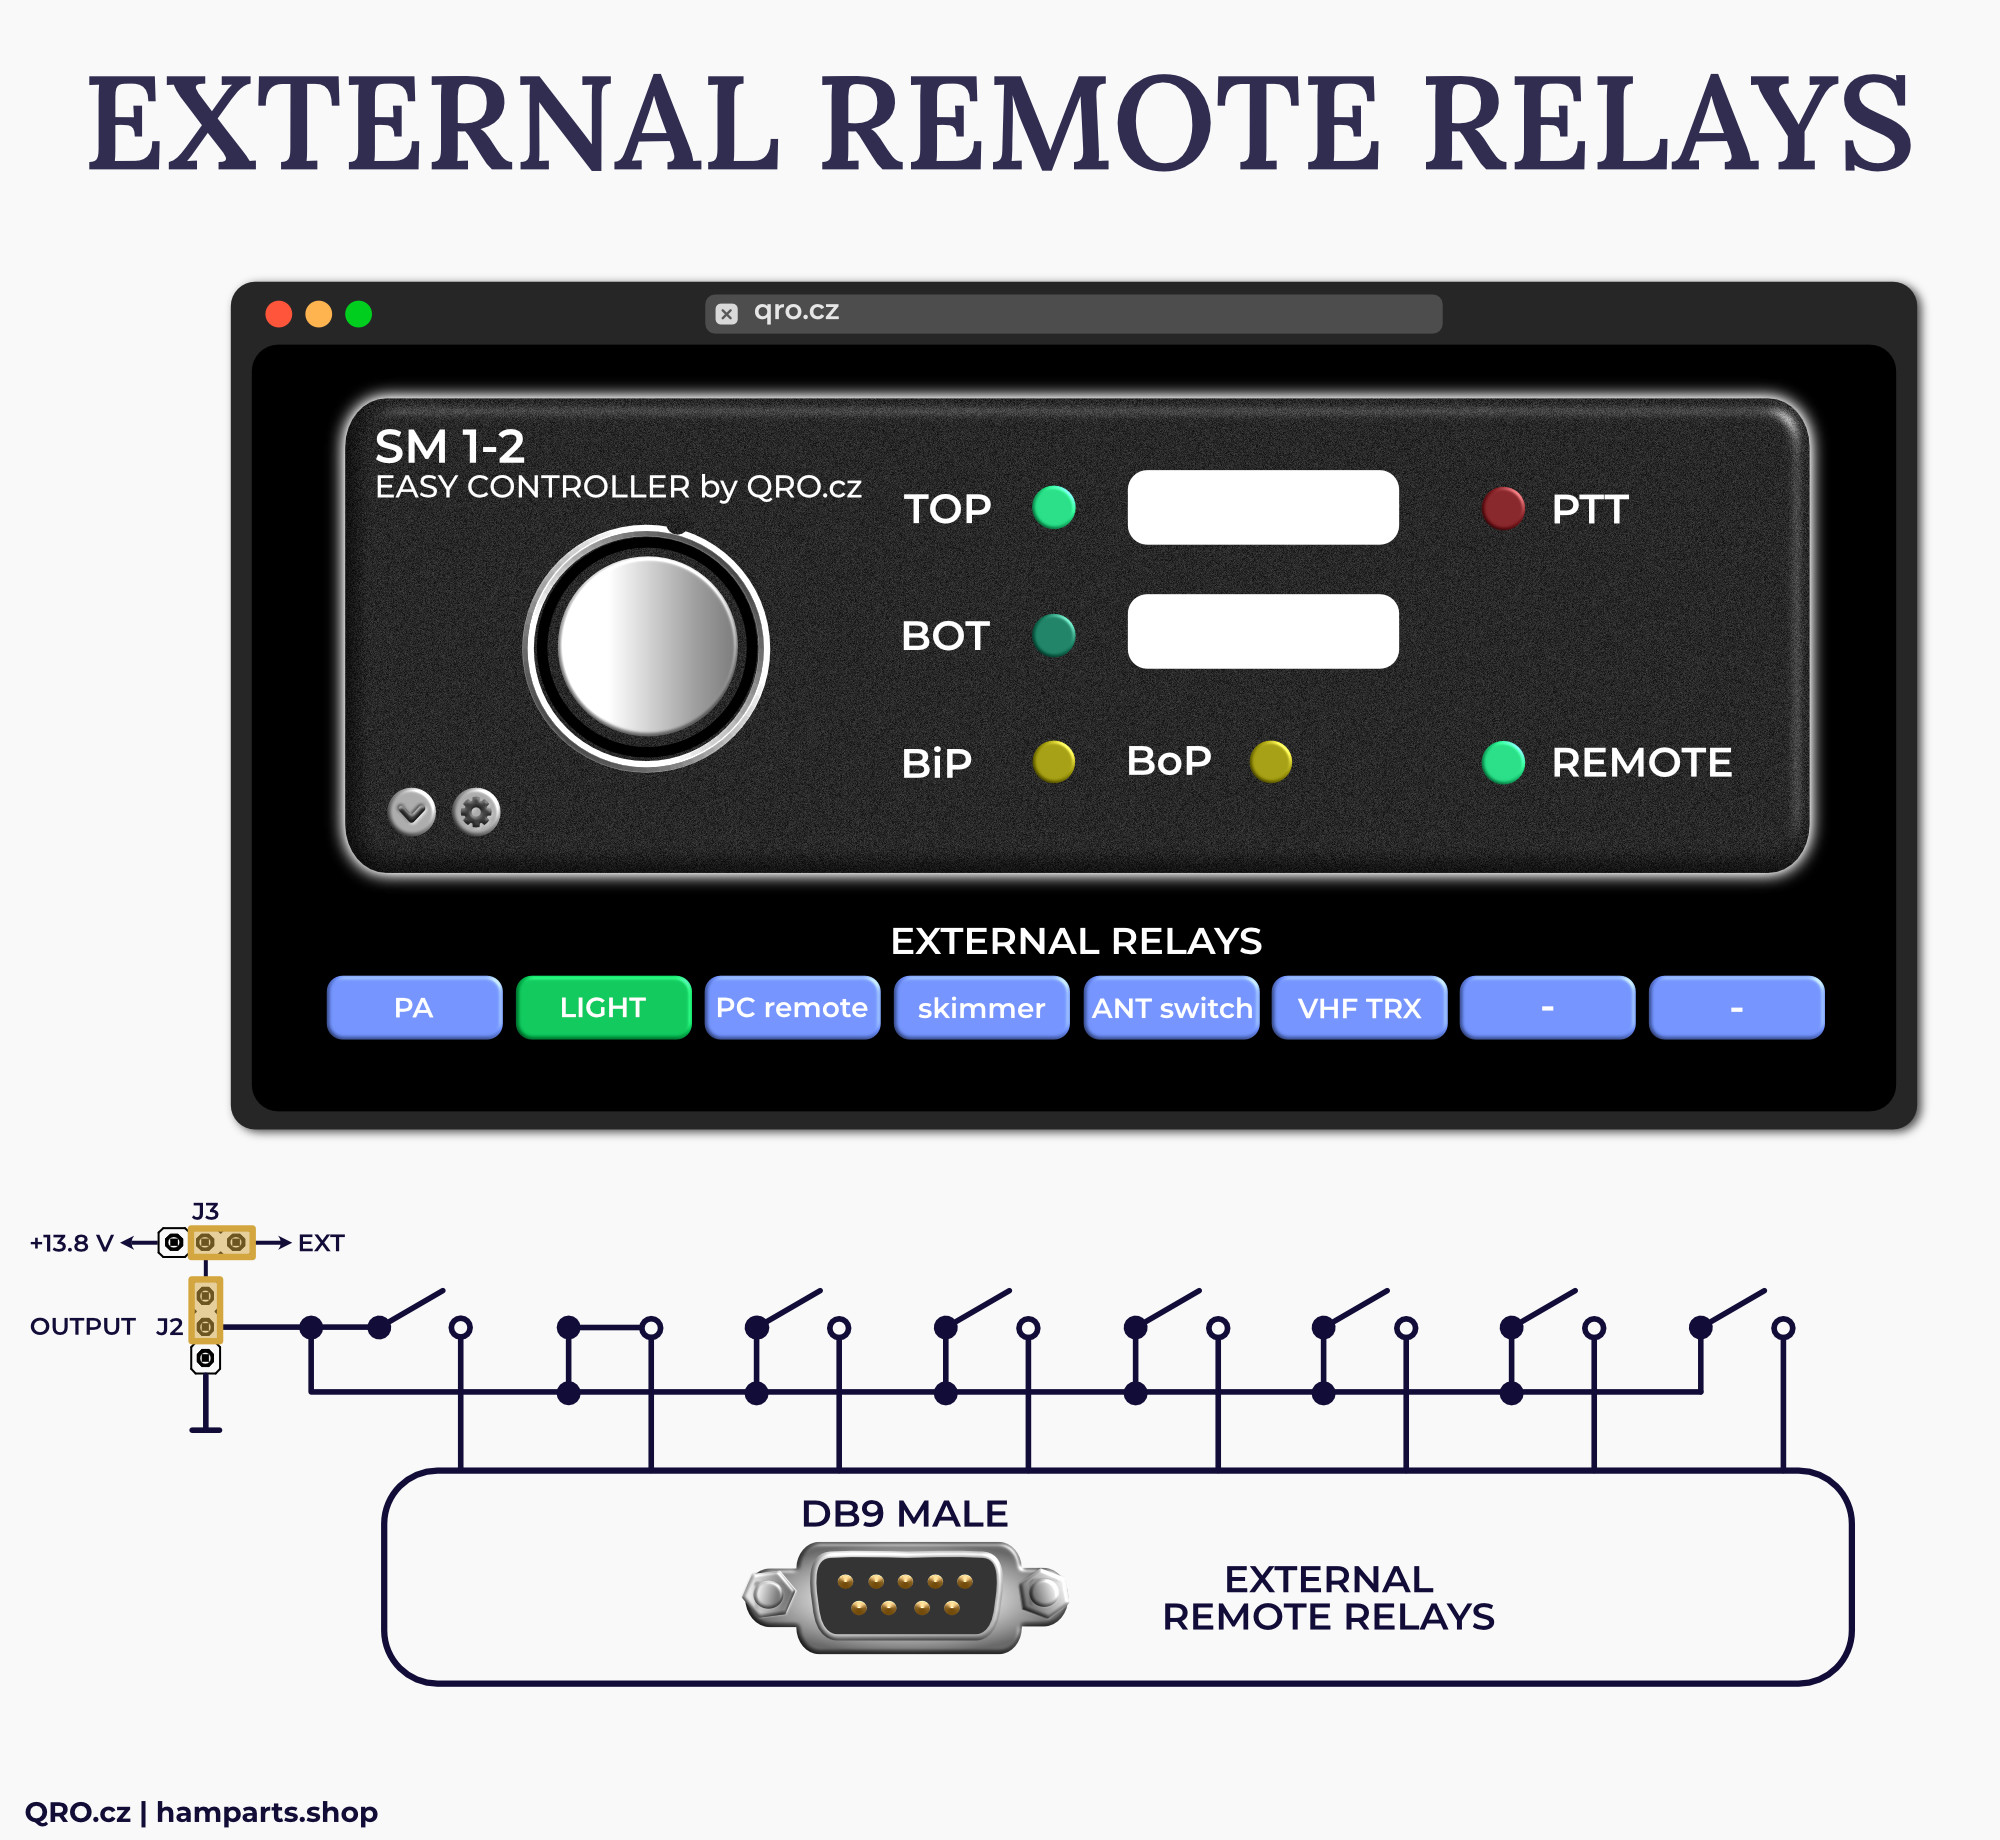 easy controller stack match 1-2 external remote relays qro.cz hamparts.shop